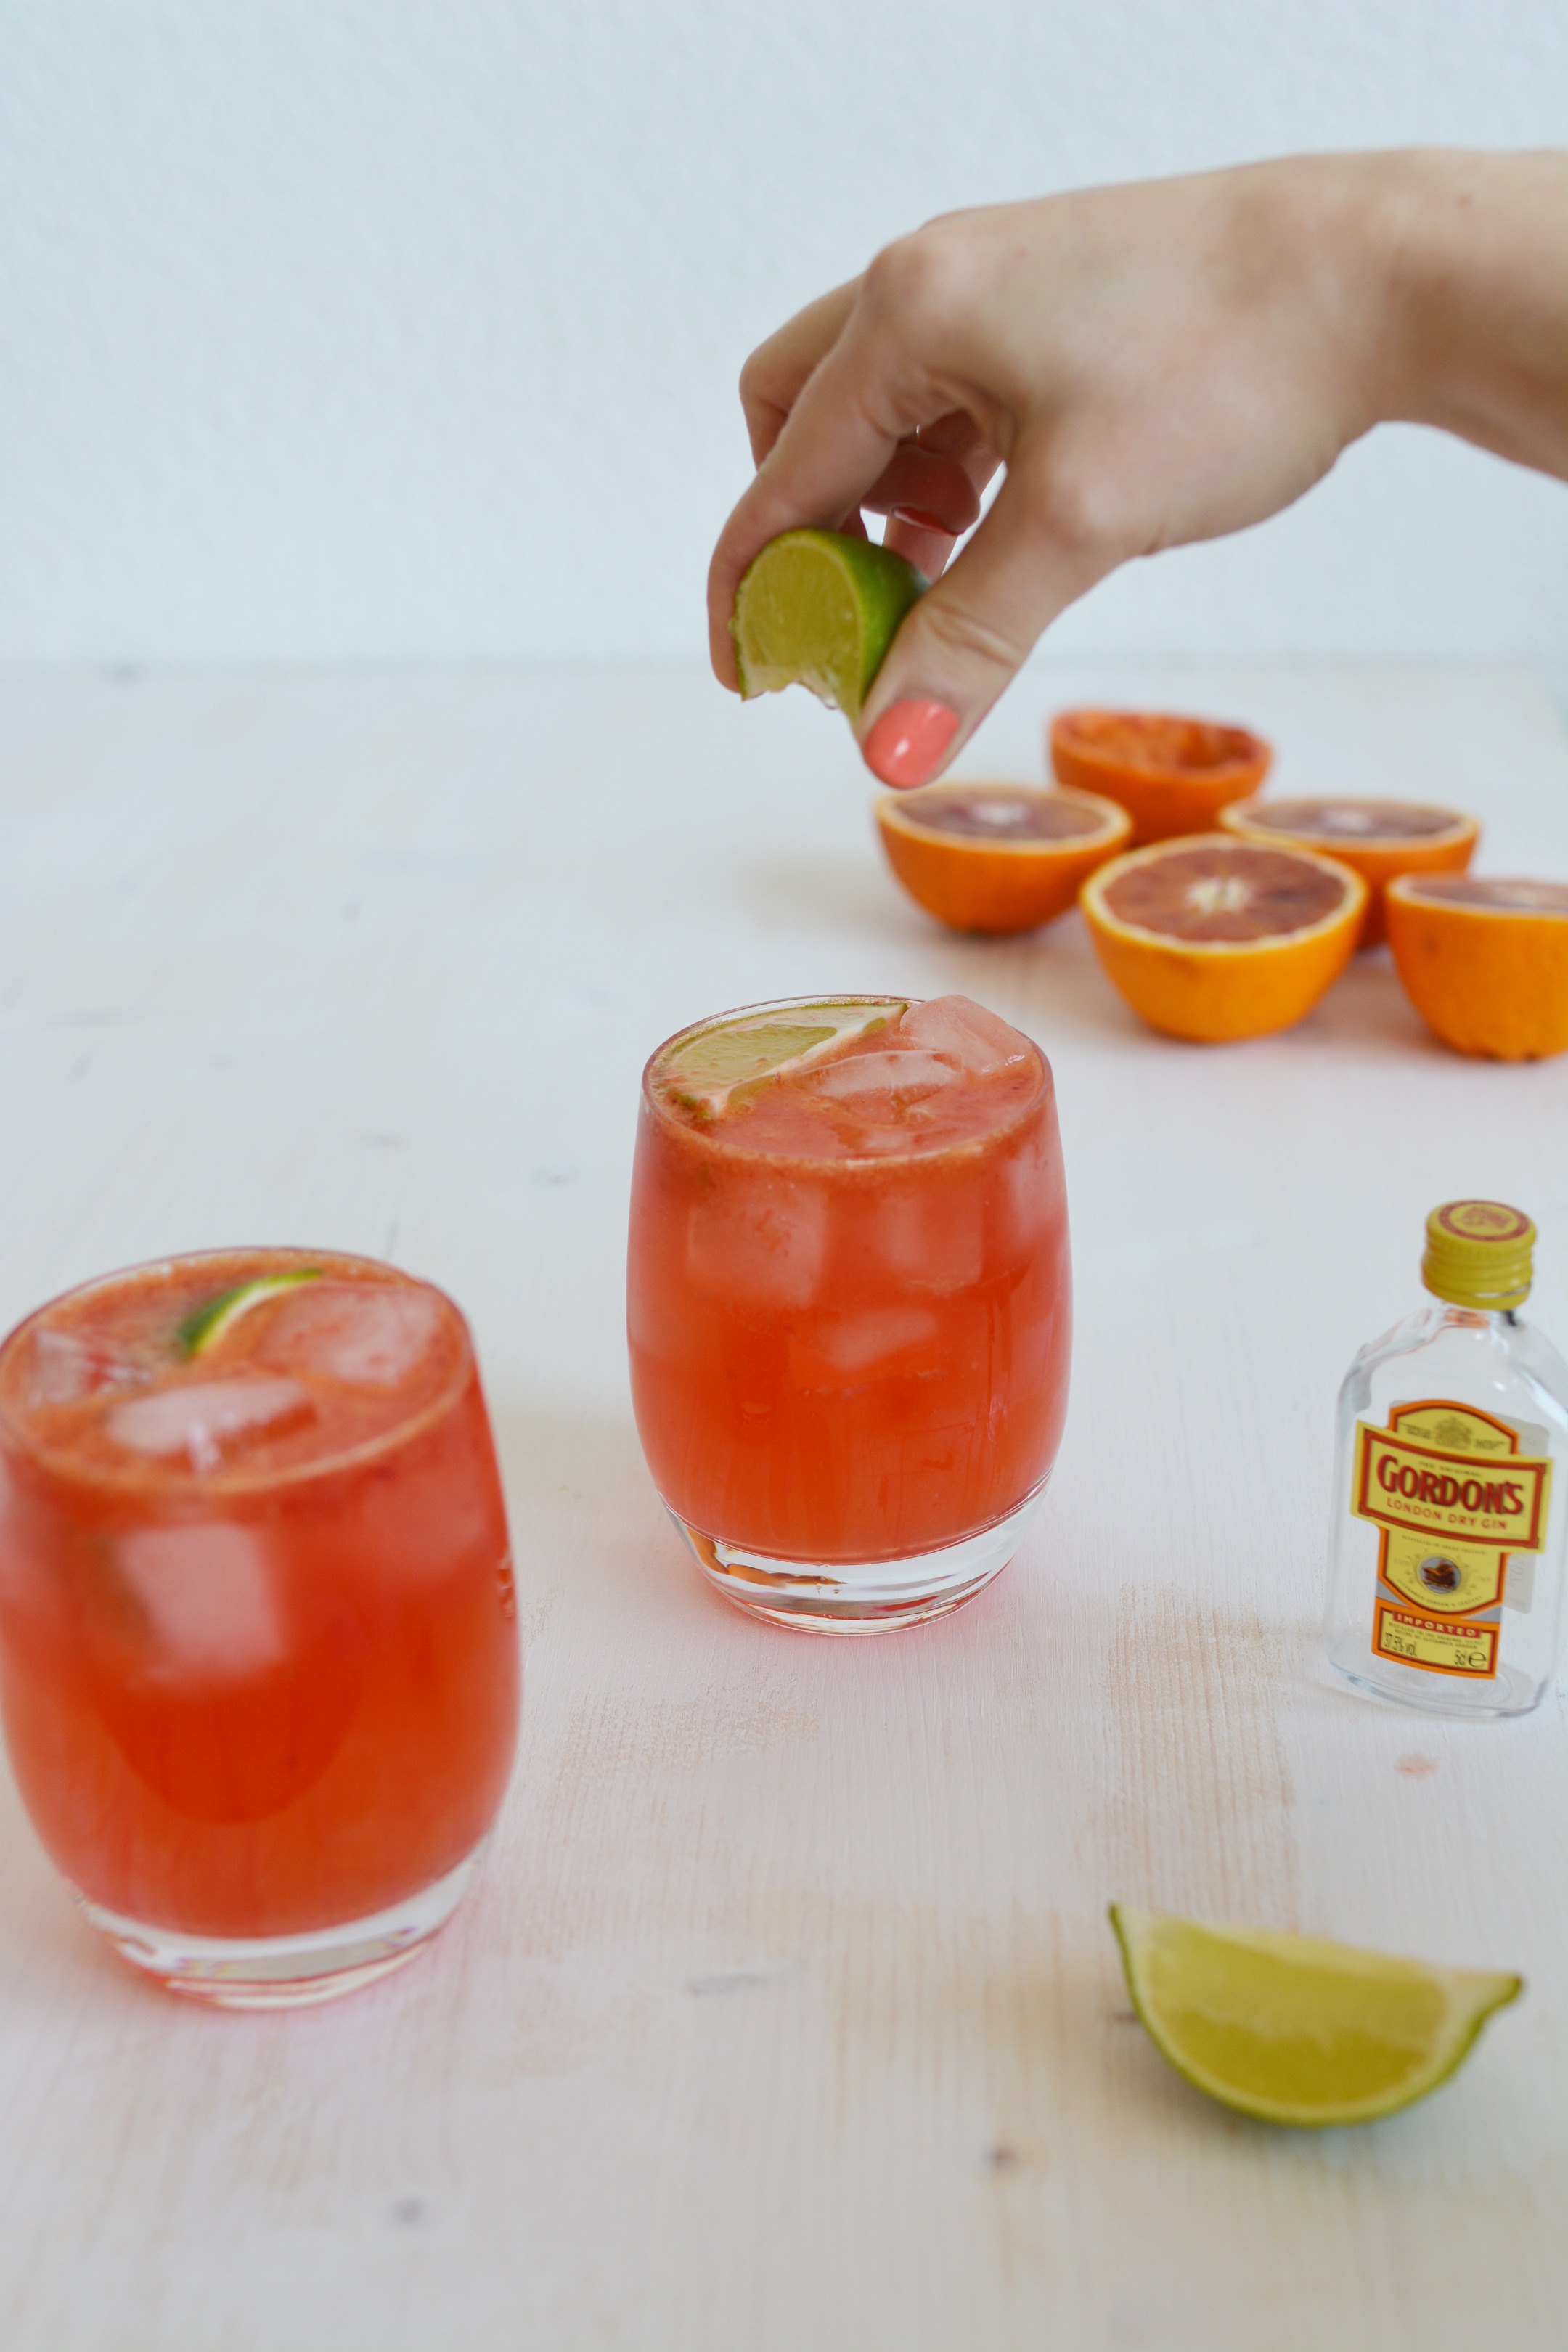 image of a hand squeezing a lime into one of two glasses of blood orange gin and tonic